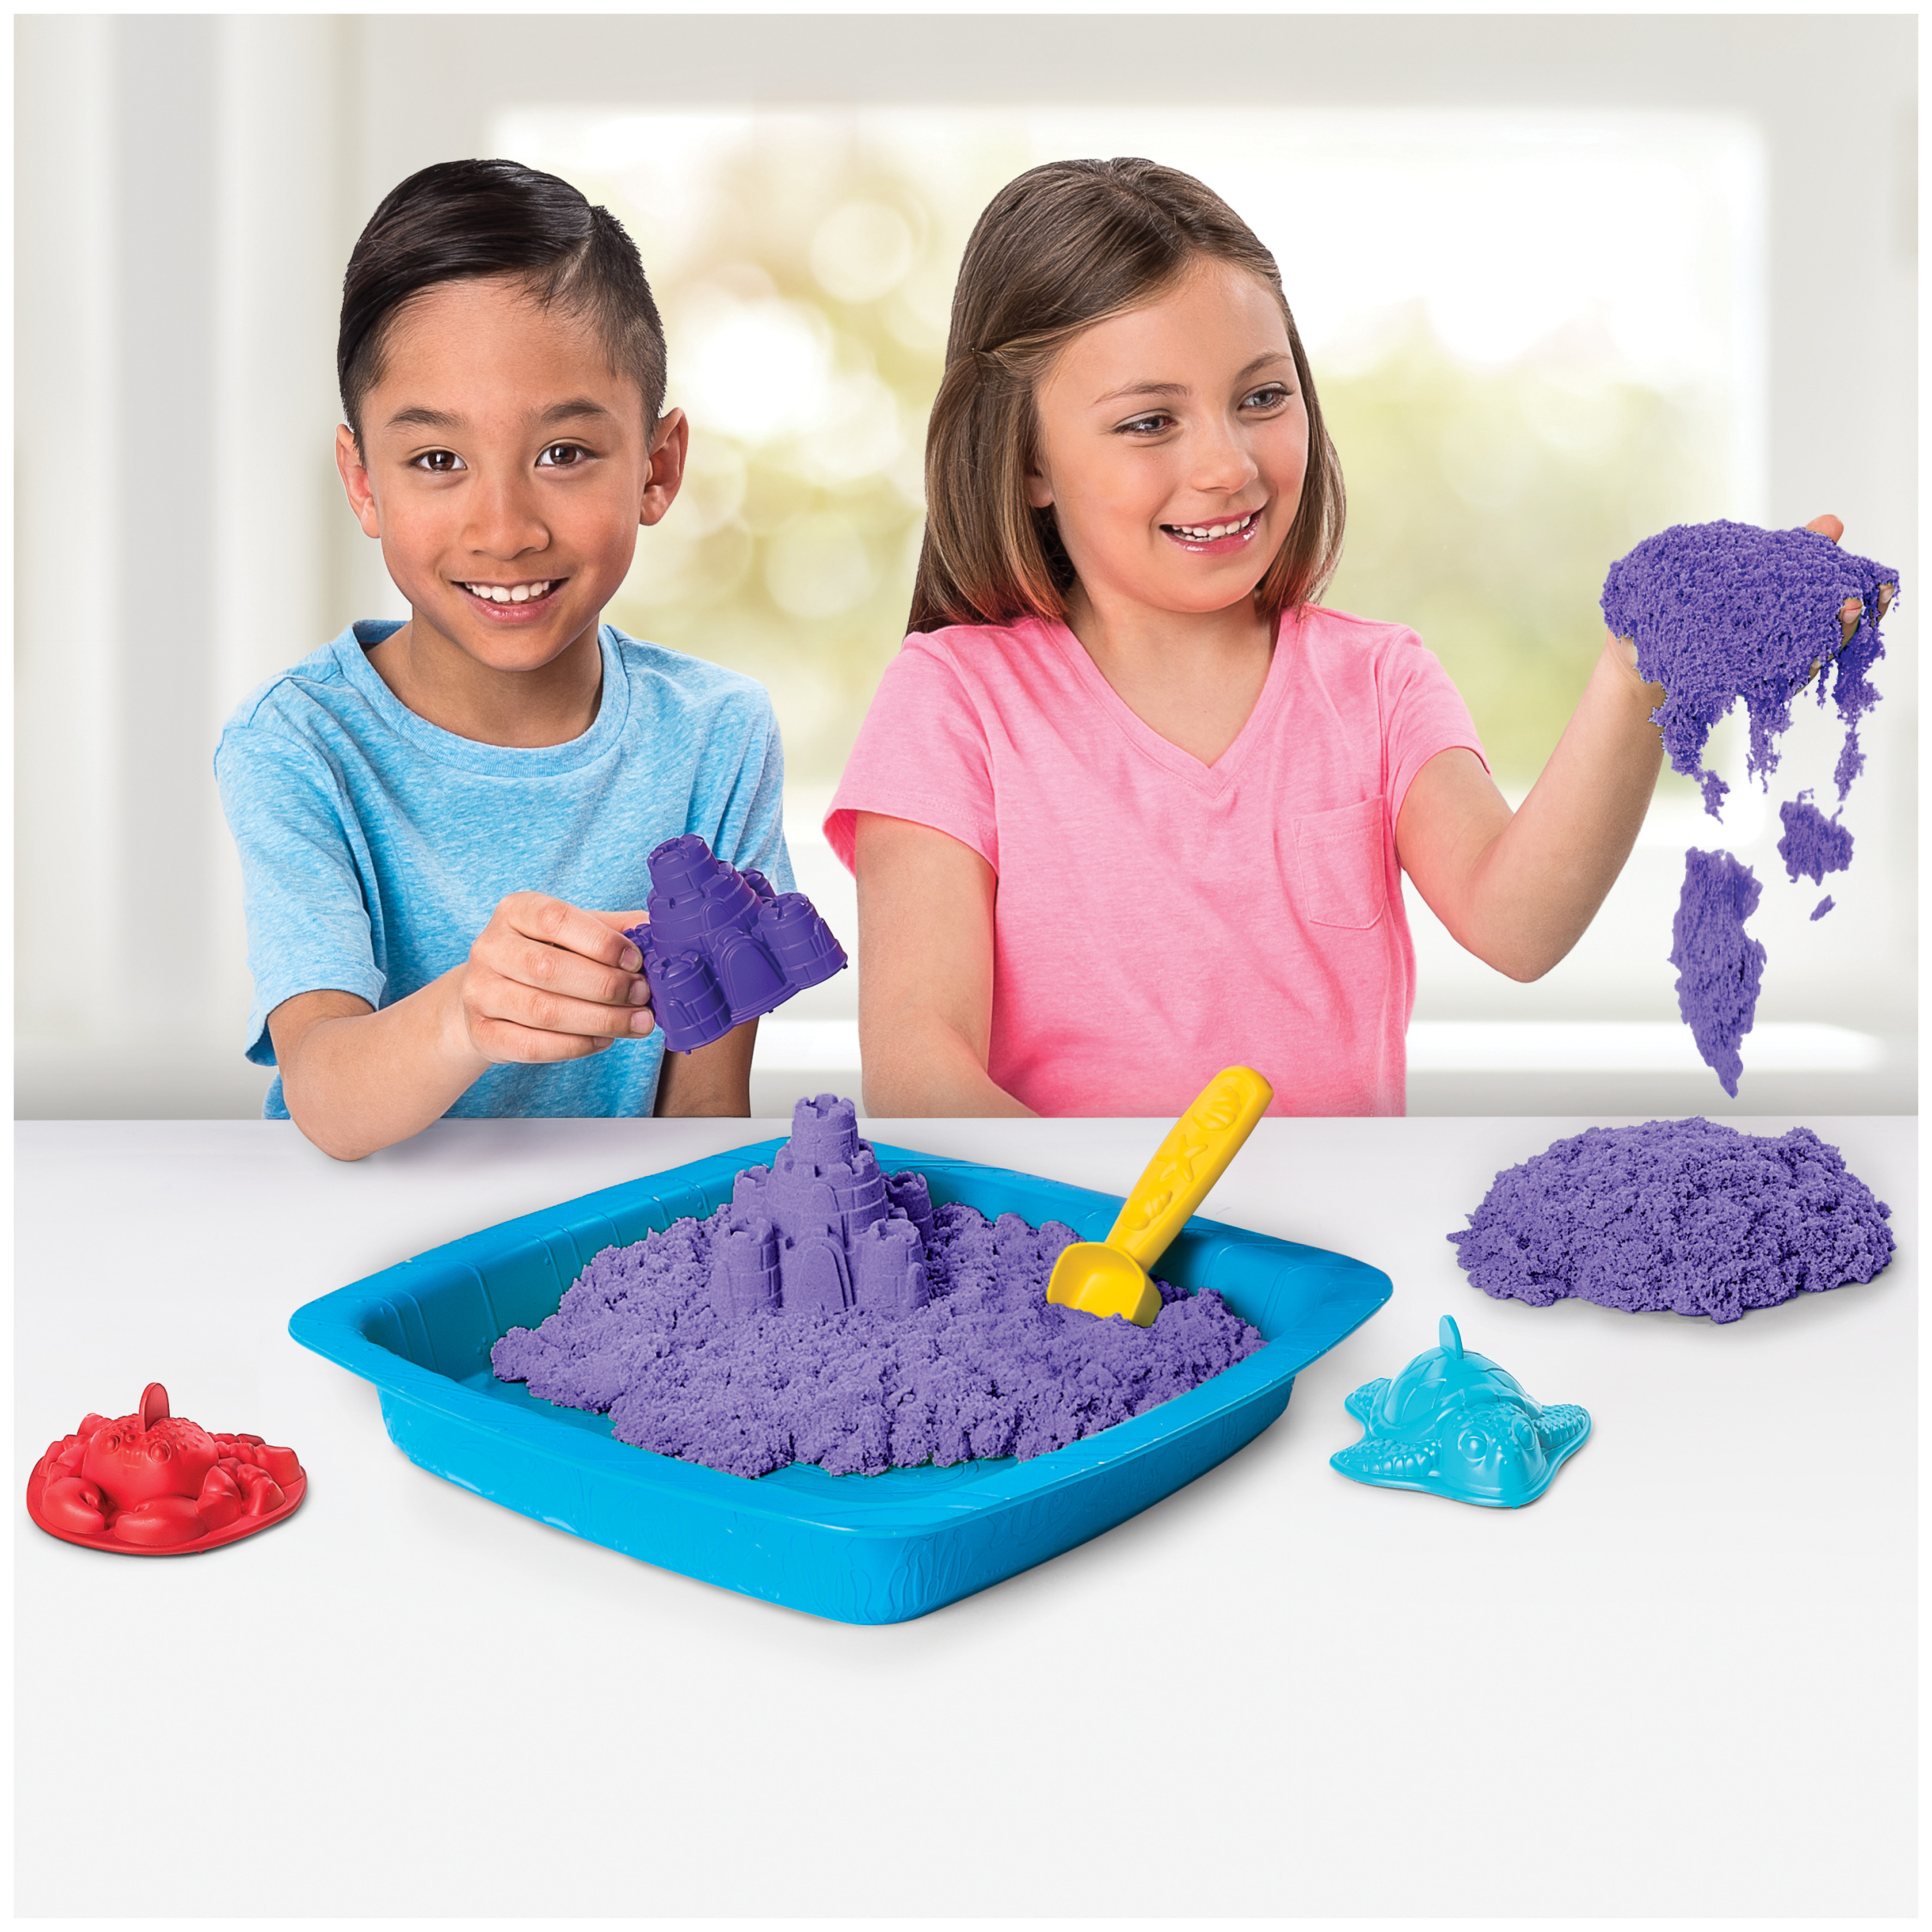 Kinetic Sand, Sandbox Playset with 1lb of Purple Kinetic Sand and 3 Molds, for Ages 3 and up - image 2 of 8